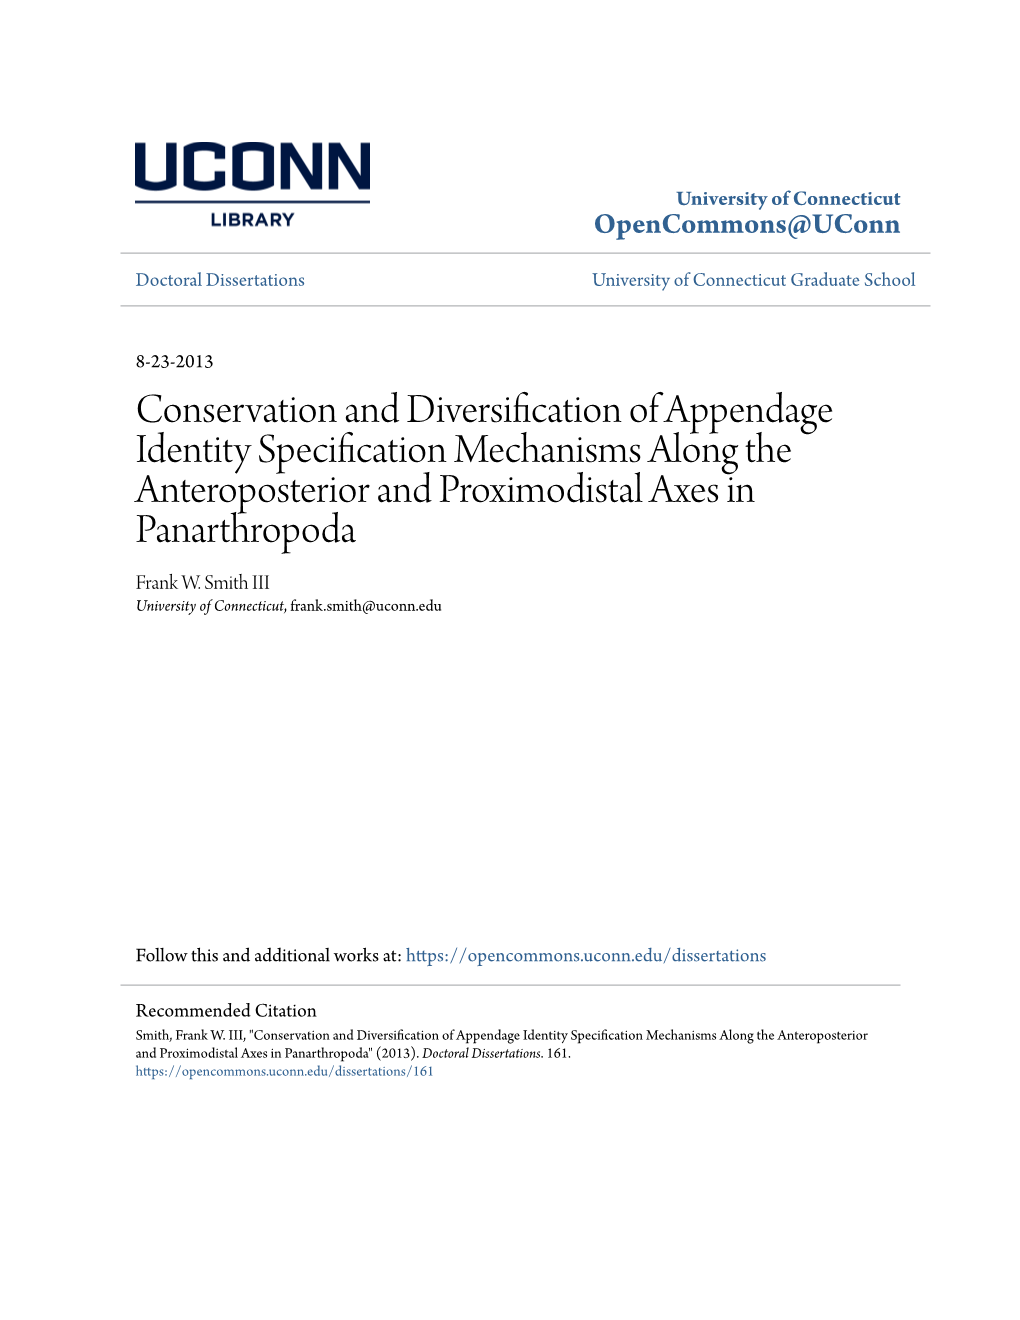 Conservation and Diversification of Appendage Identity Specification Mechanisms Along the Anteroposterior and Proximodistal Axes in Panarthropoda Frank W